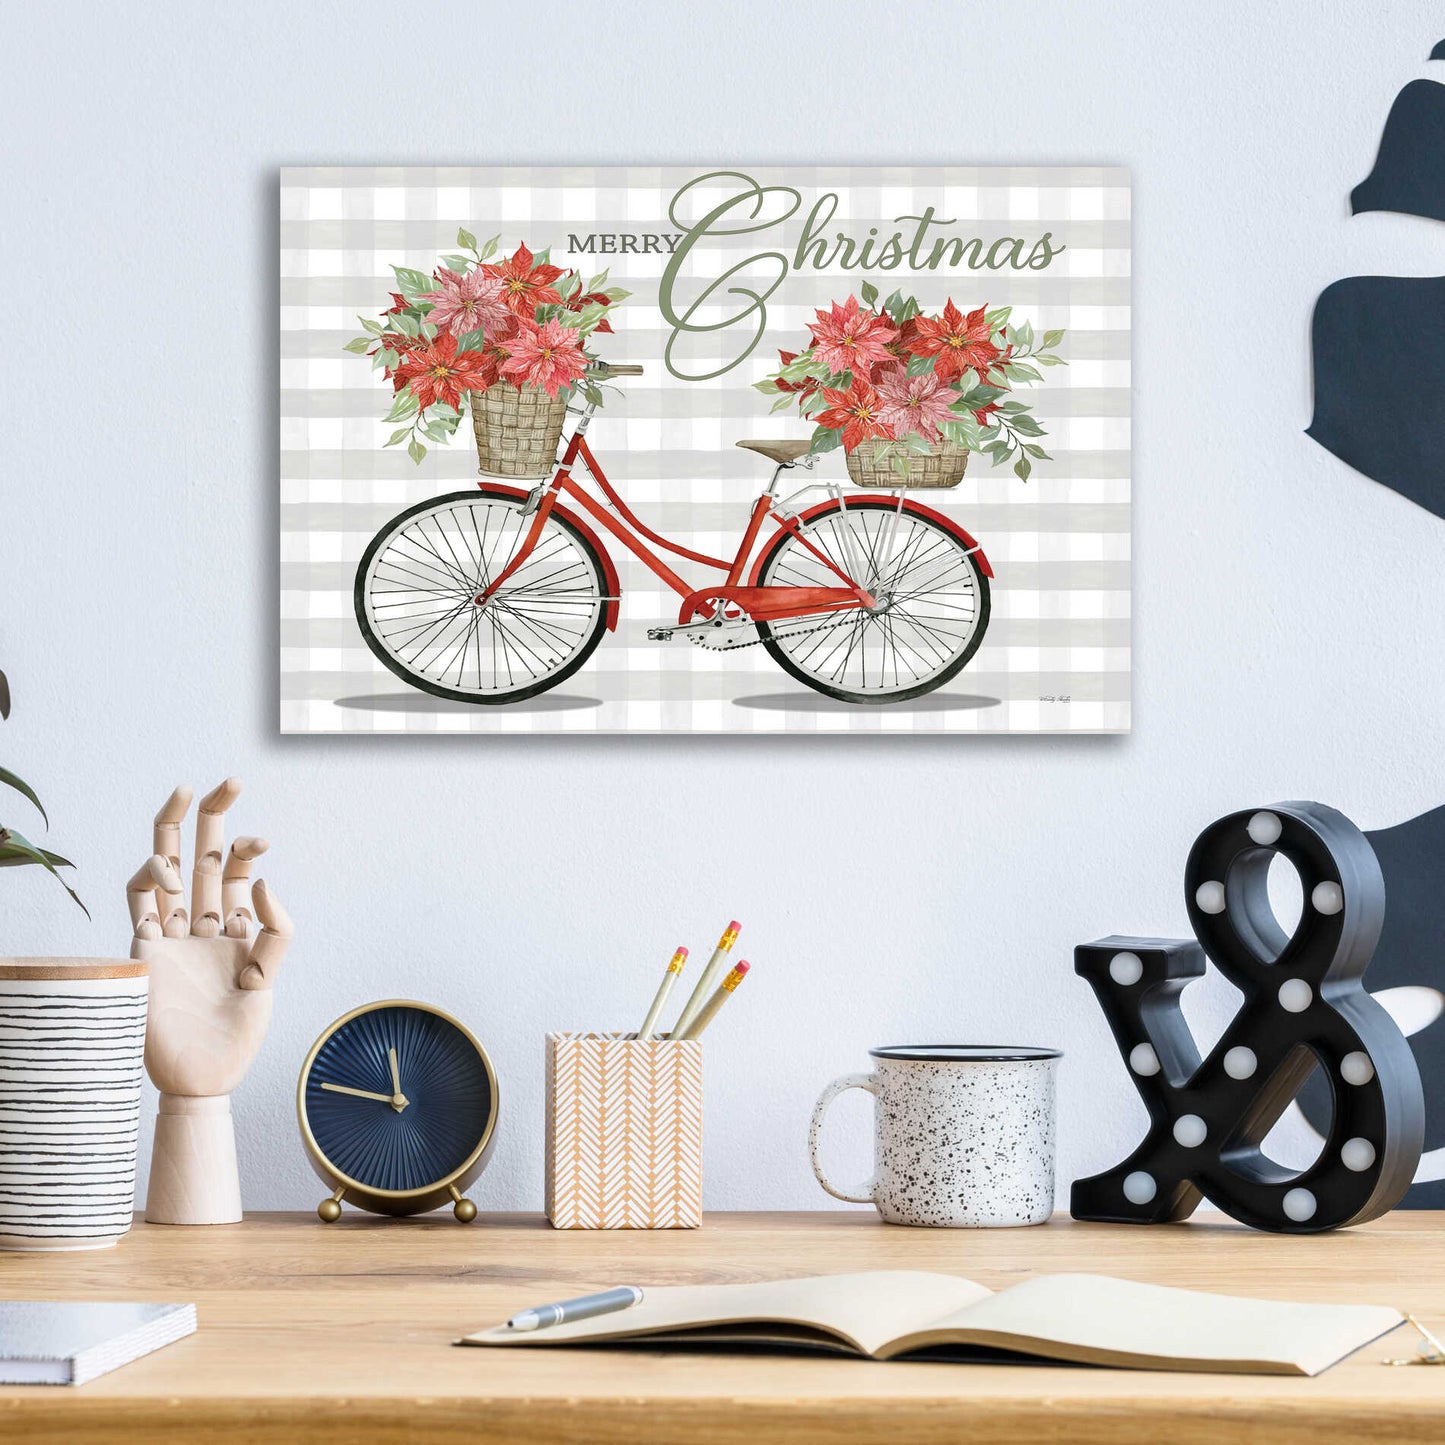 Epic Art 'Merry Christmas Bicycle I' by Cindy Jacobs, Acrylic Glass Wall Art,16x12